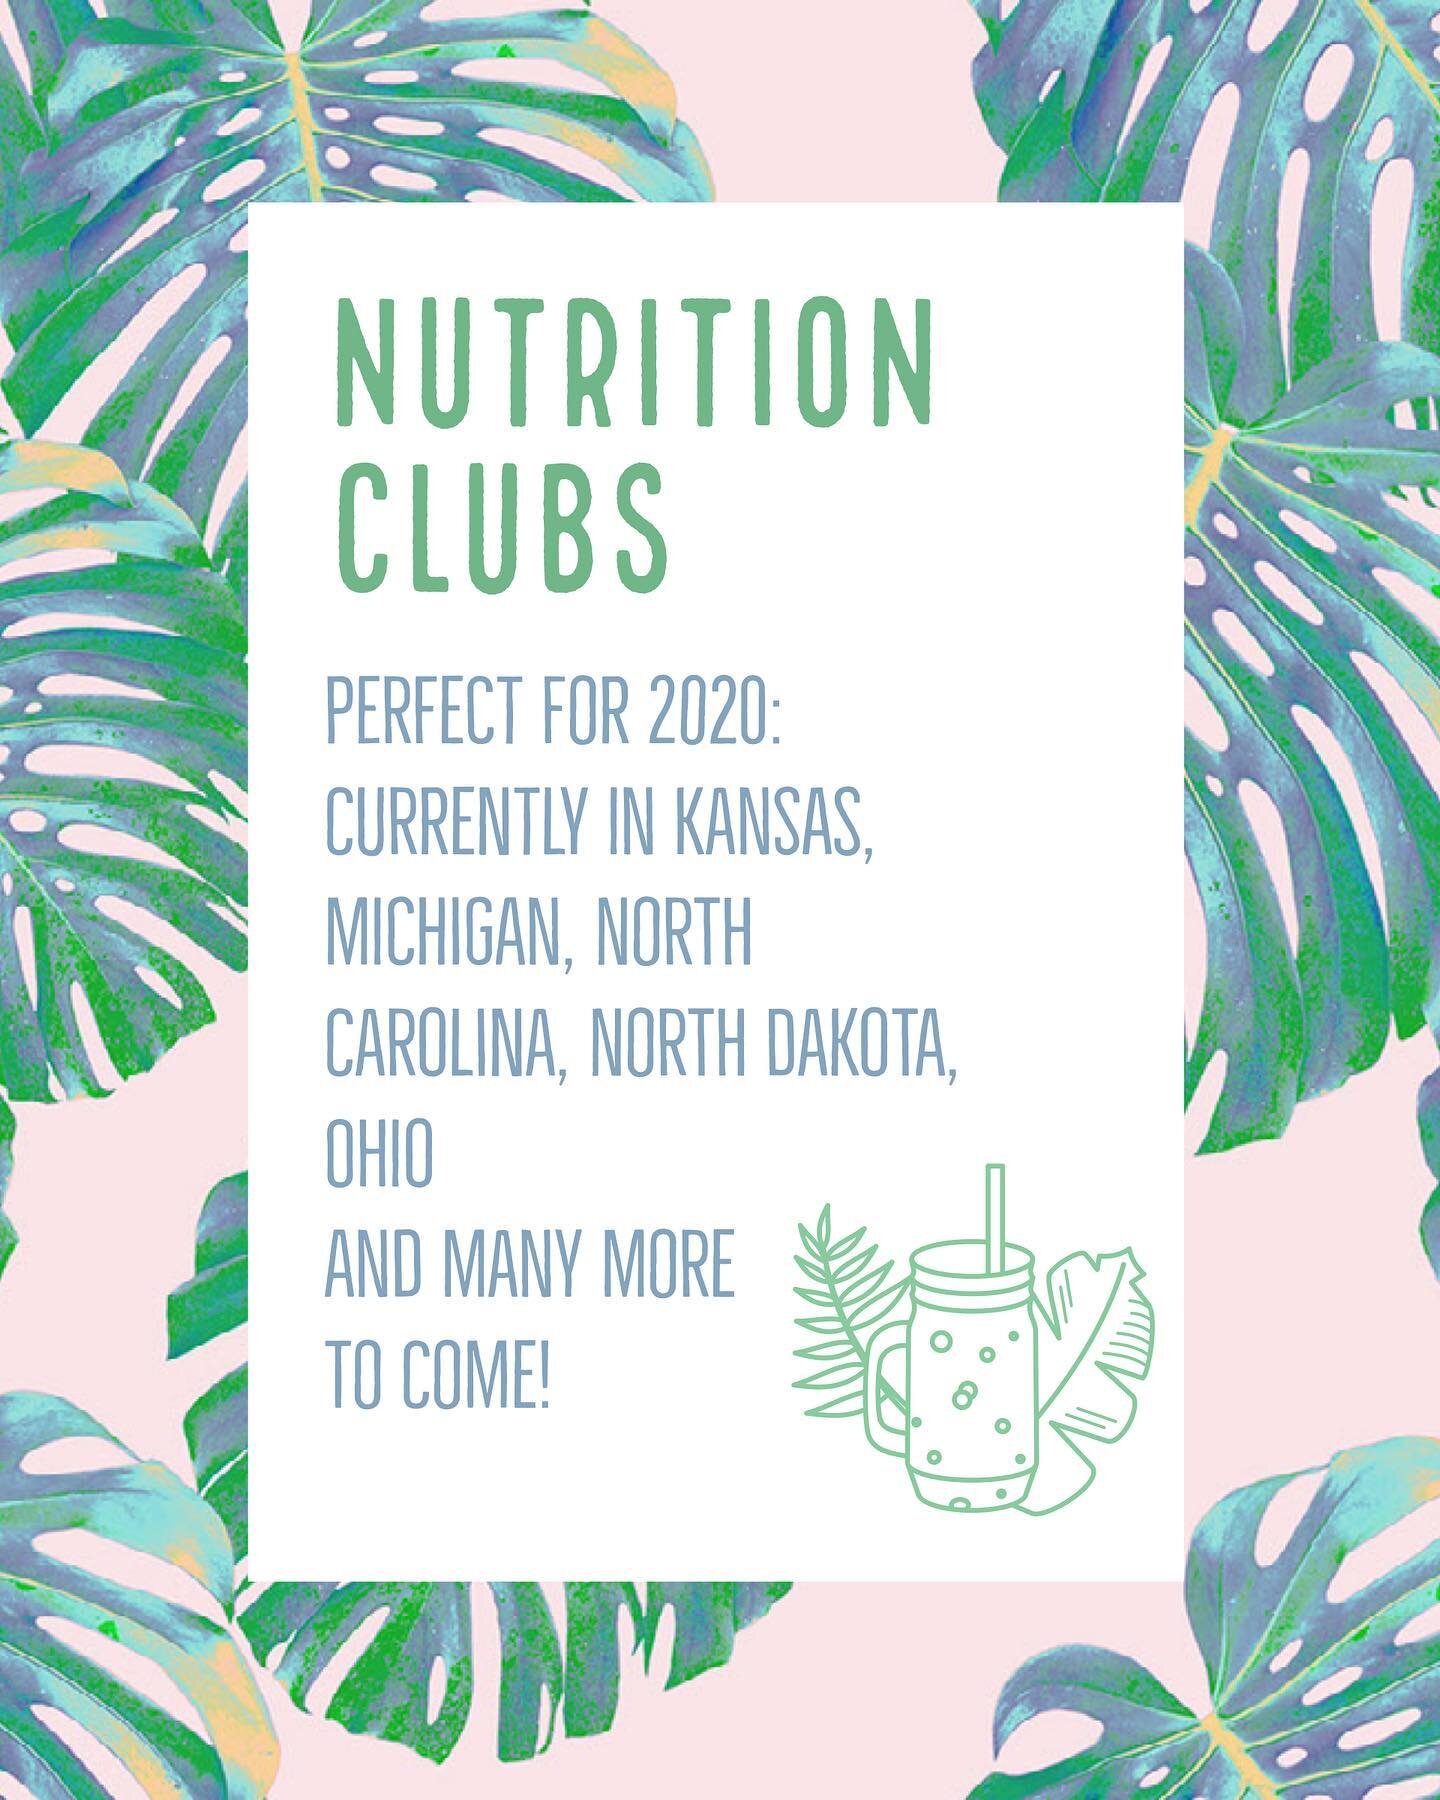 Attention all Nutrition Clubs! &bull; Promote your Nutrition Club
&bull; Additional Retail Revenue Stream
&bull; Possible Incentives (customers come back with straw &amp; get % off!)
&bull; SAVES ENVIRONMENT FROM PLASTIC POLLUTION! 🐢

DM or visit ou